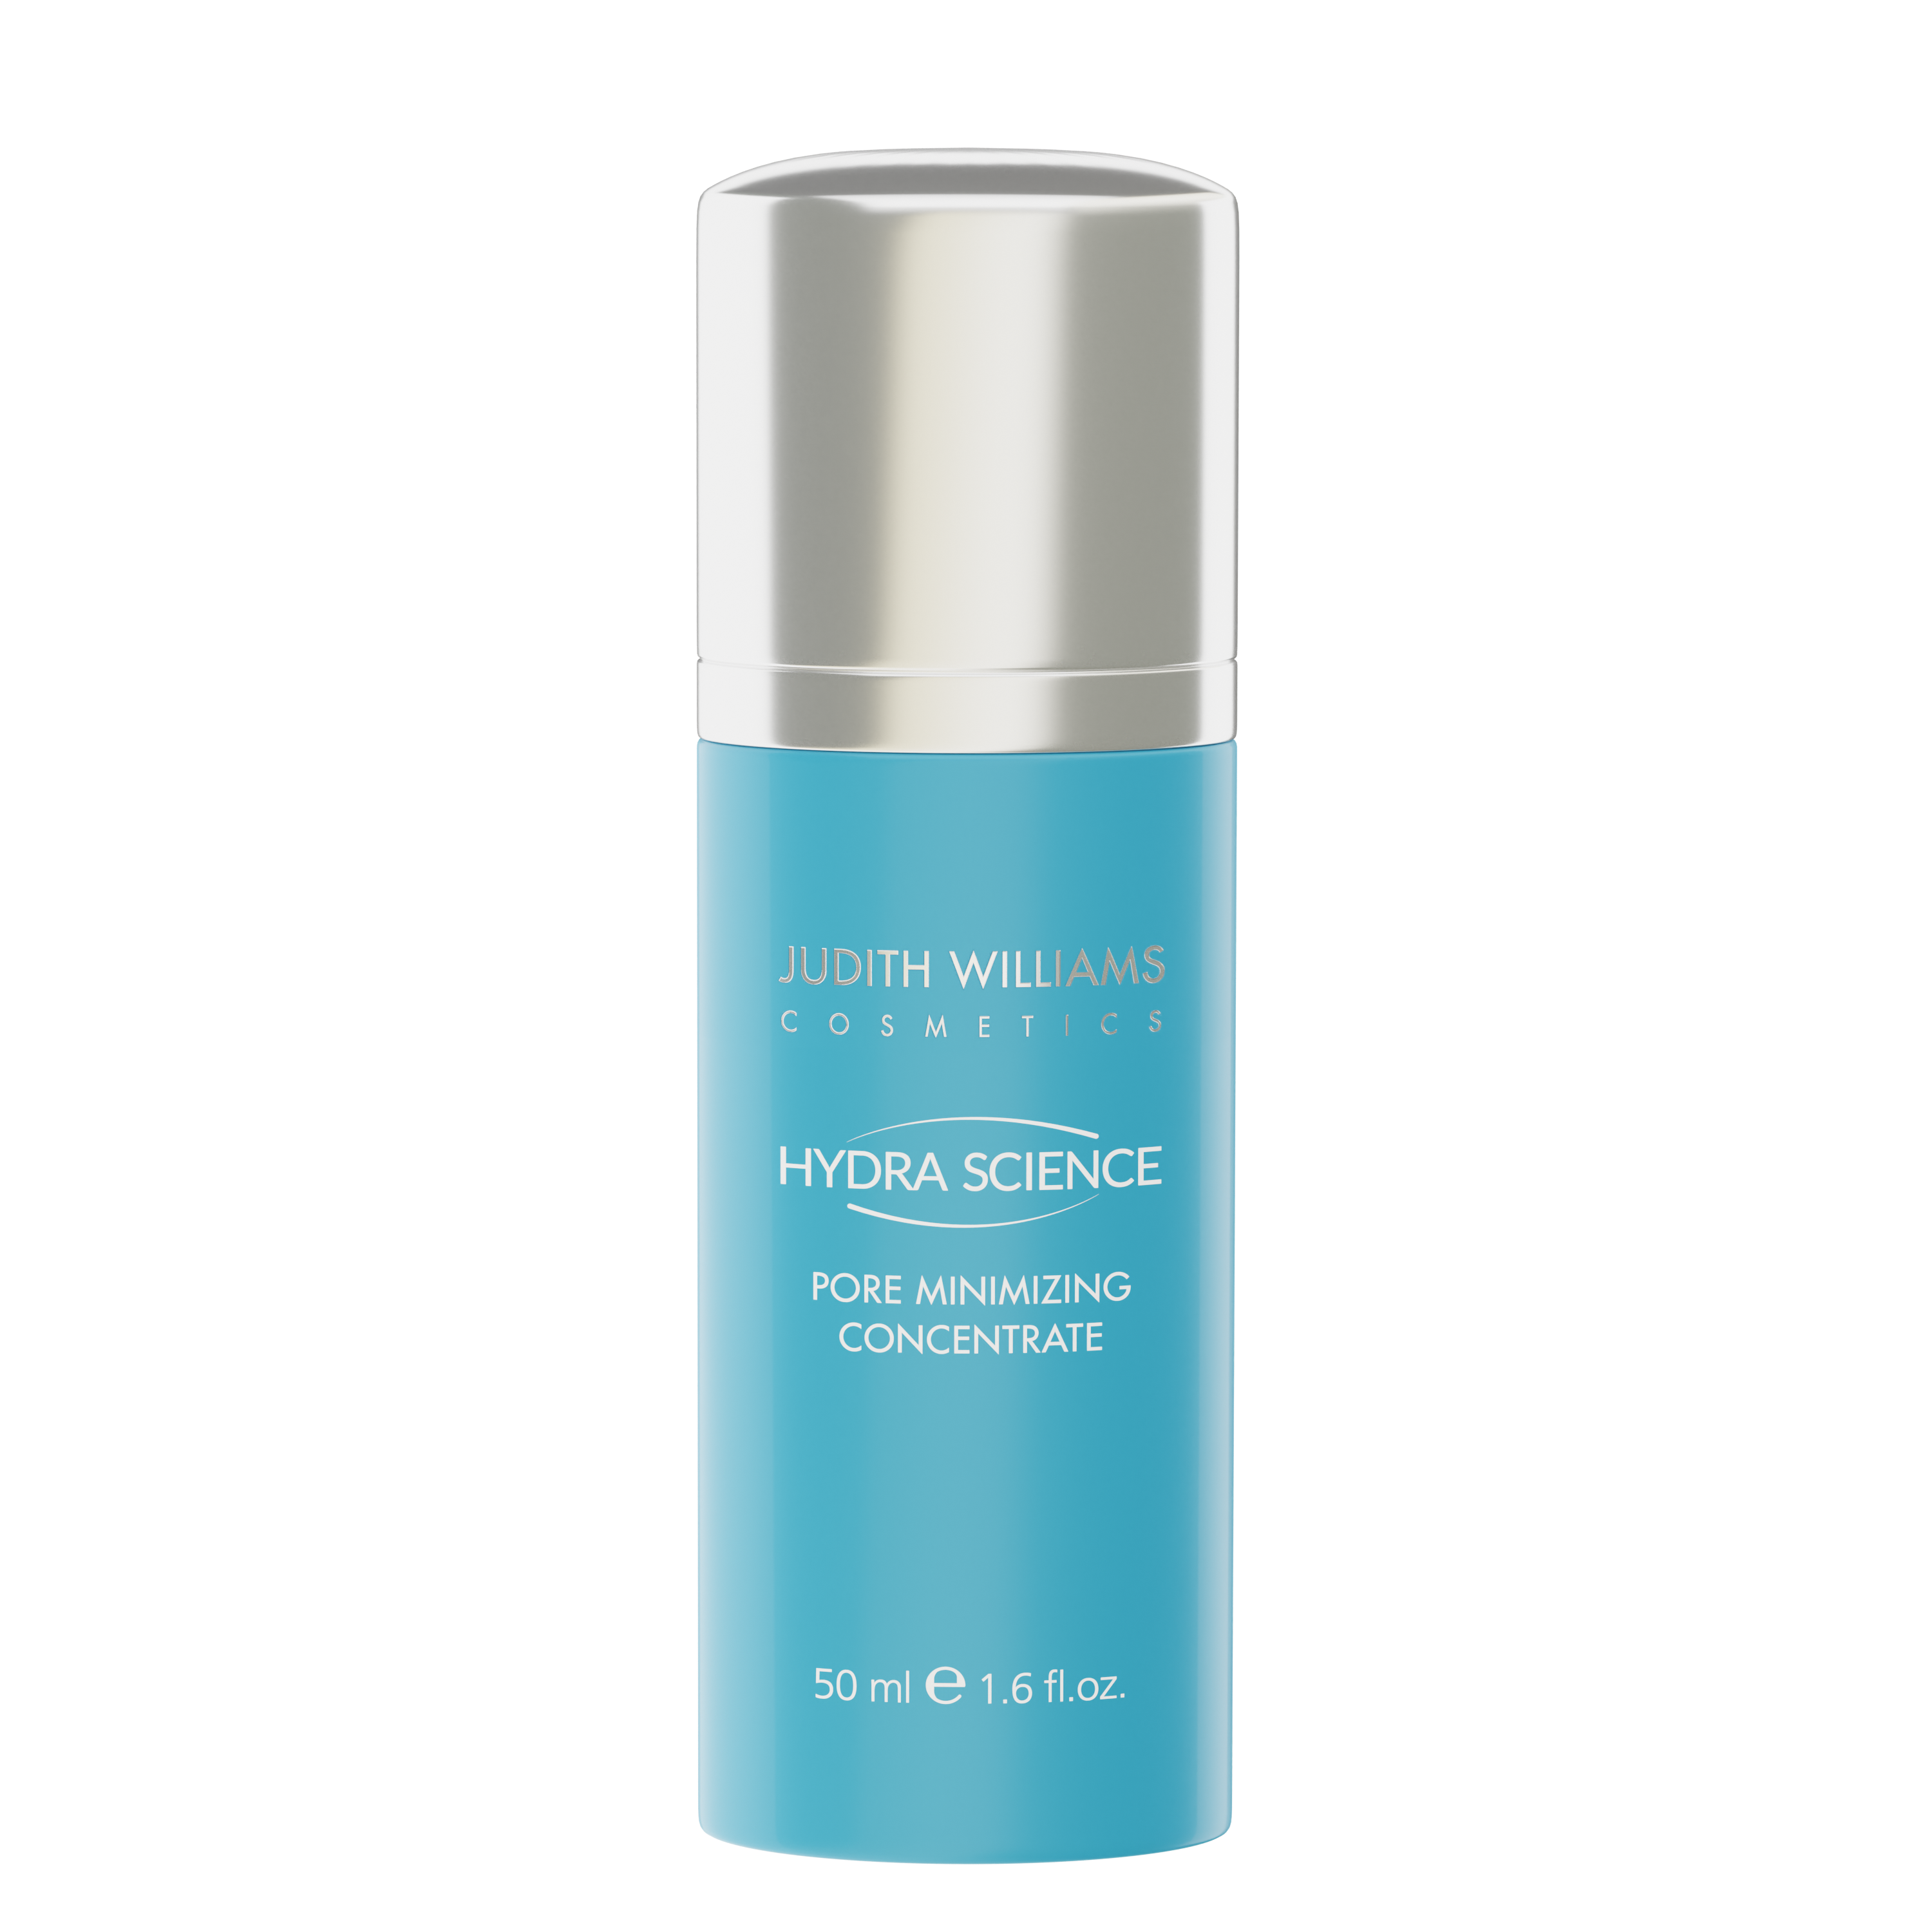 Hydra Science Pore Minimizing Concentrate